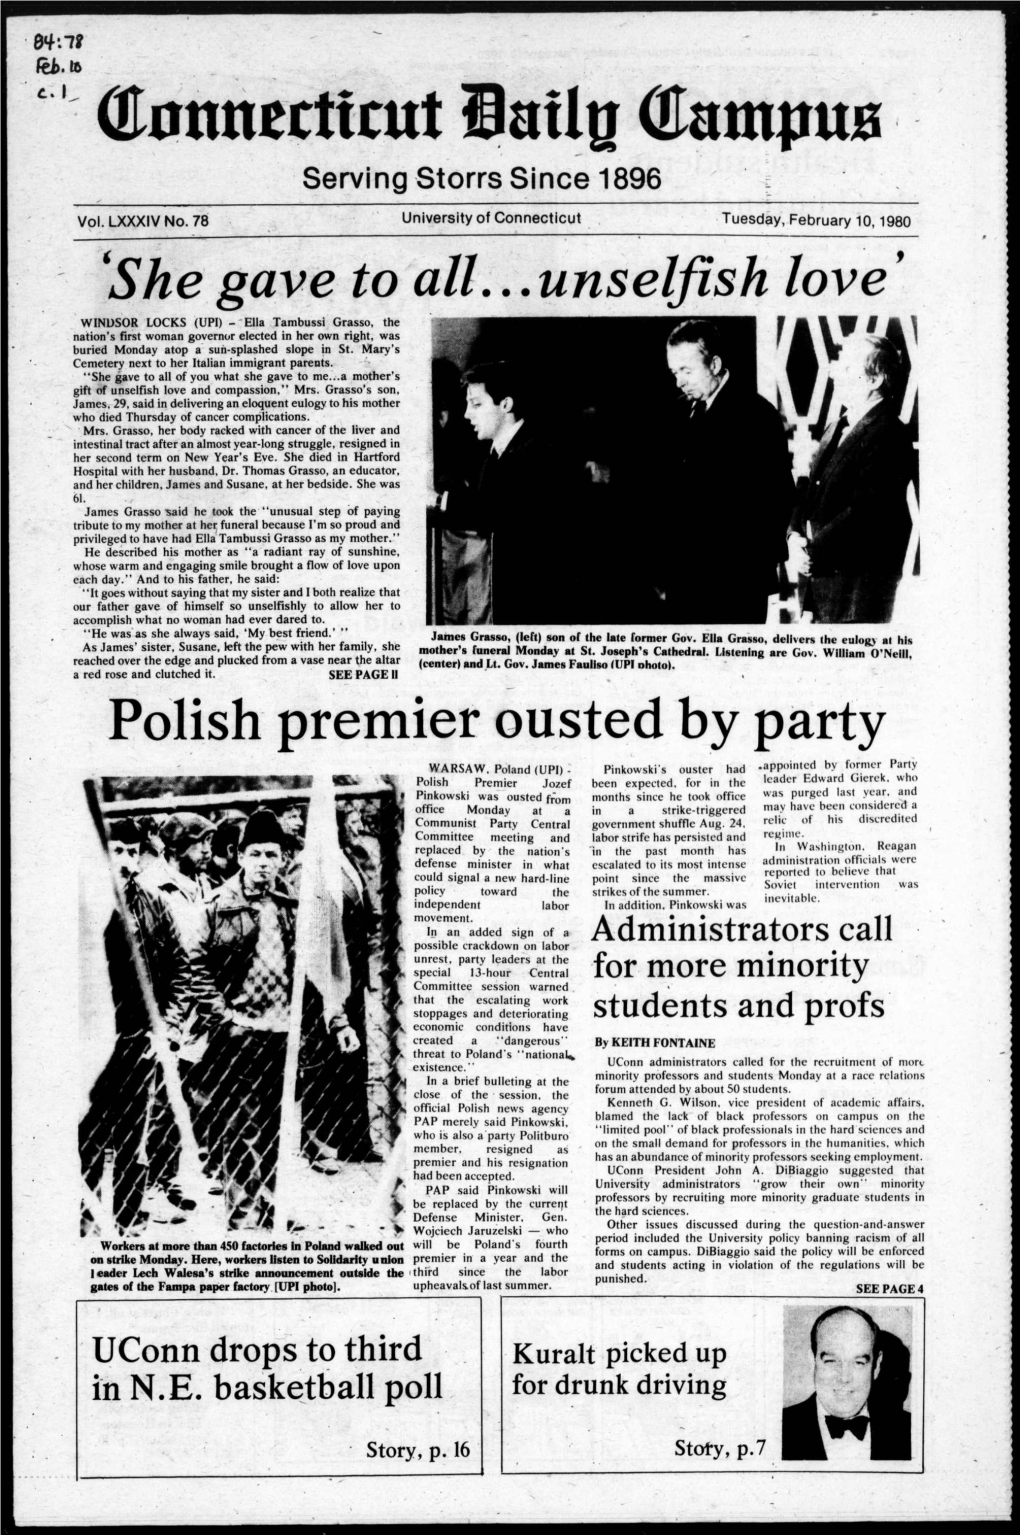 She Gave to All... Unselfish Love' Polish Premier Ousted by Party